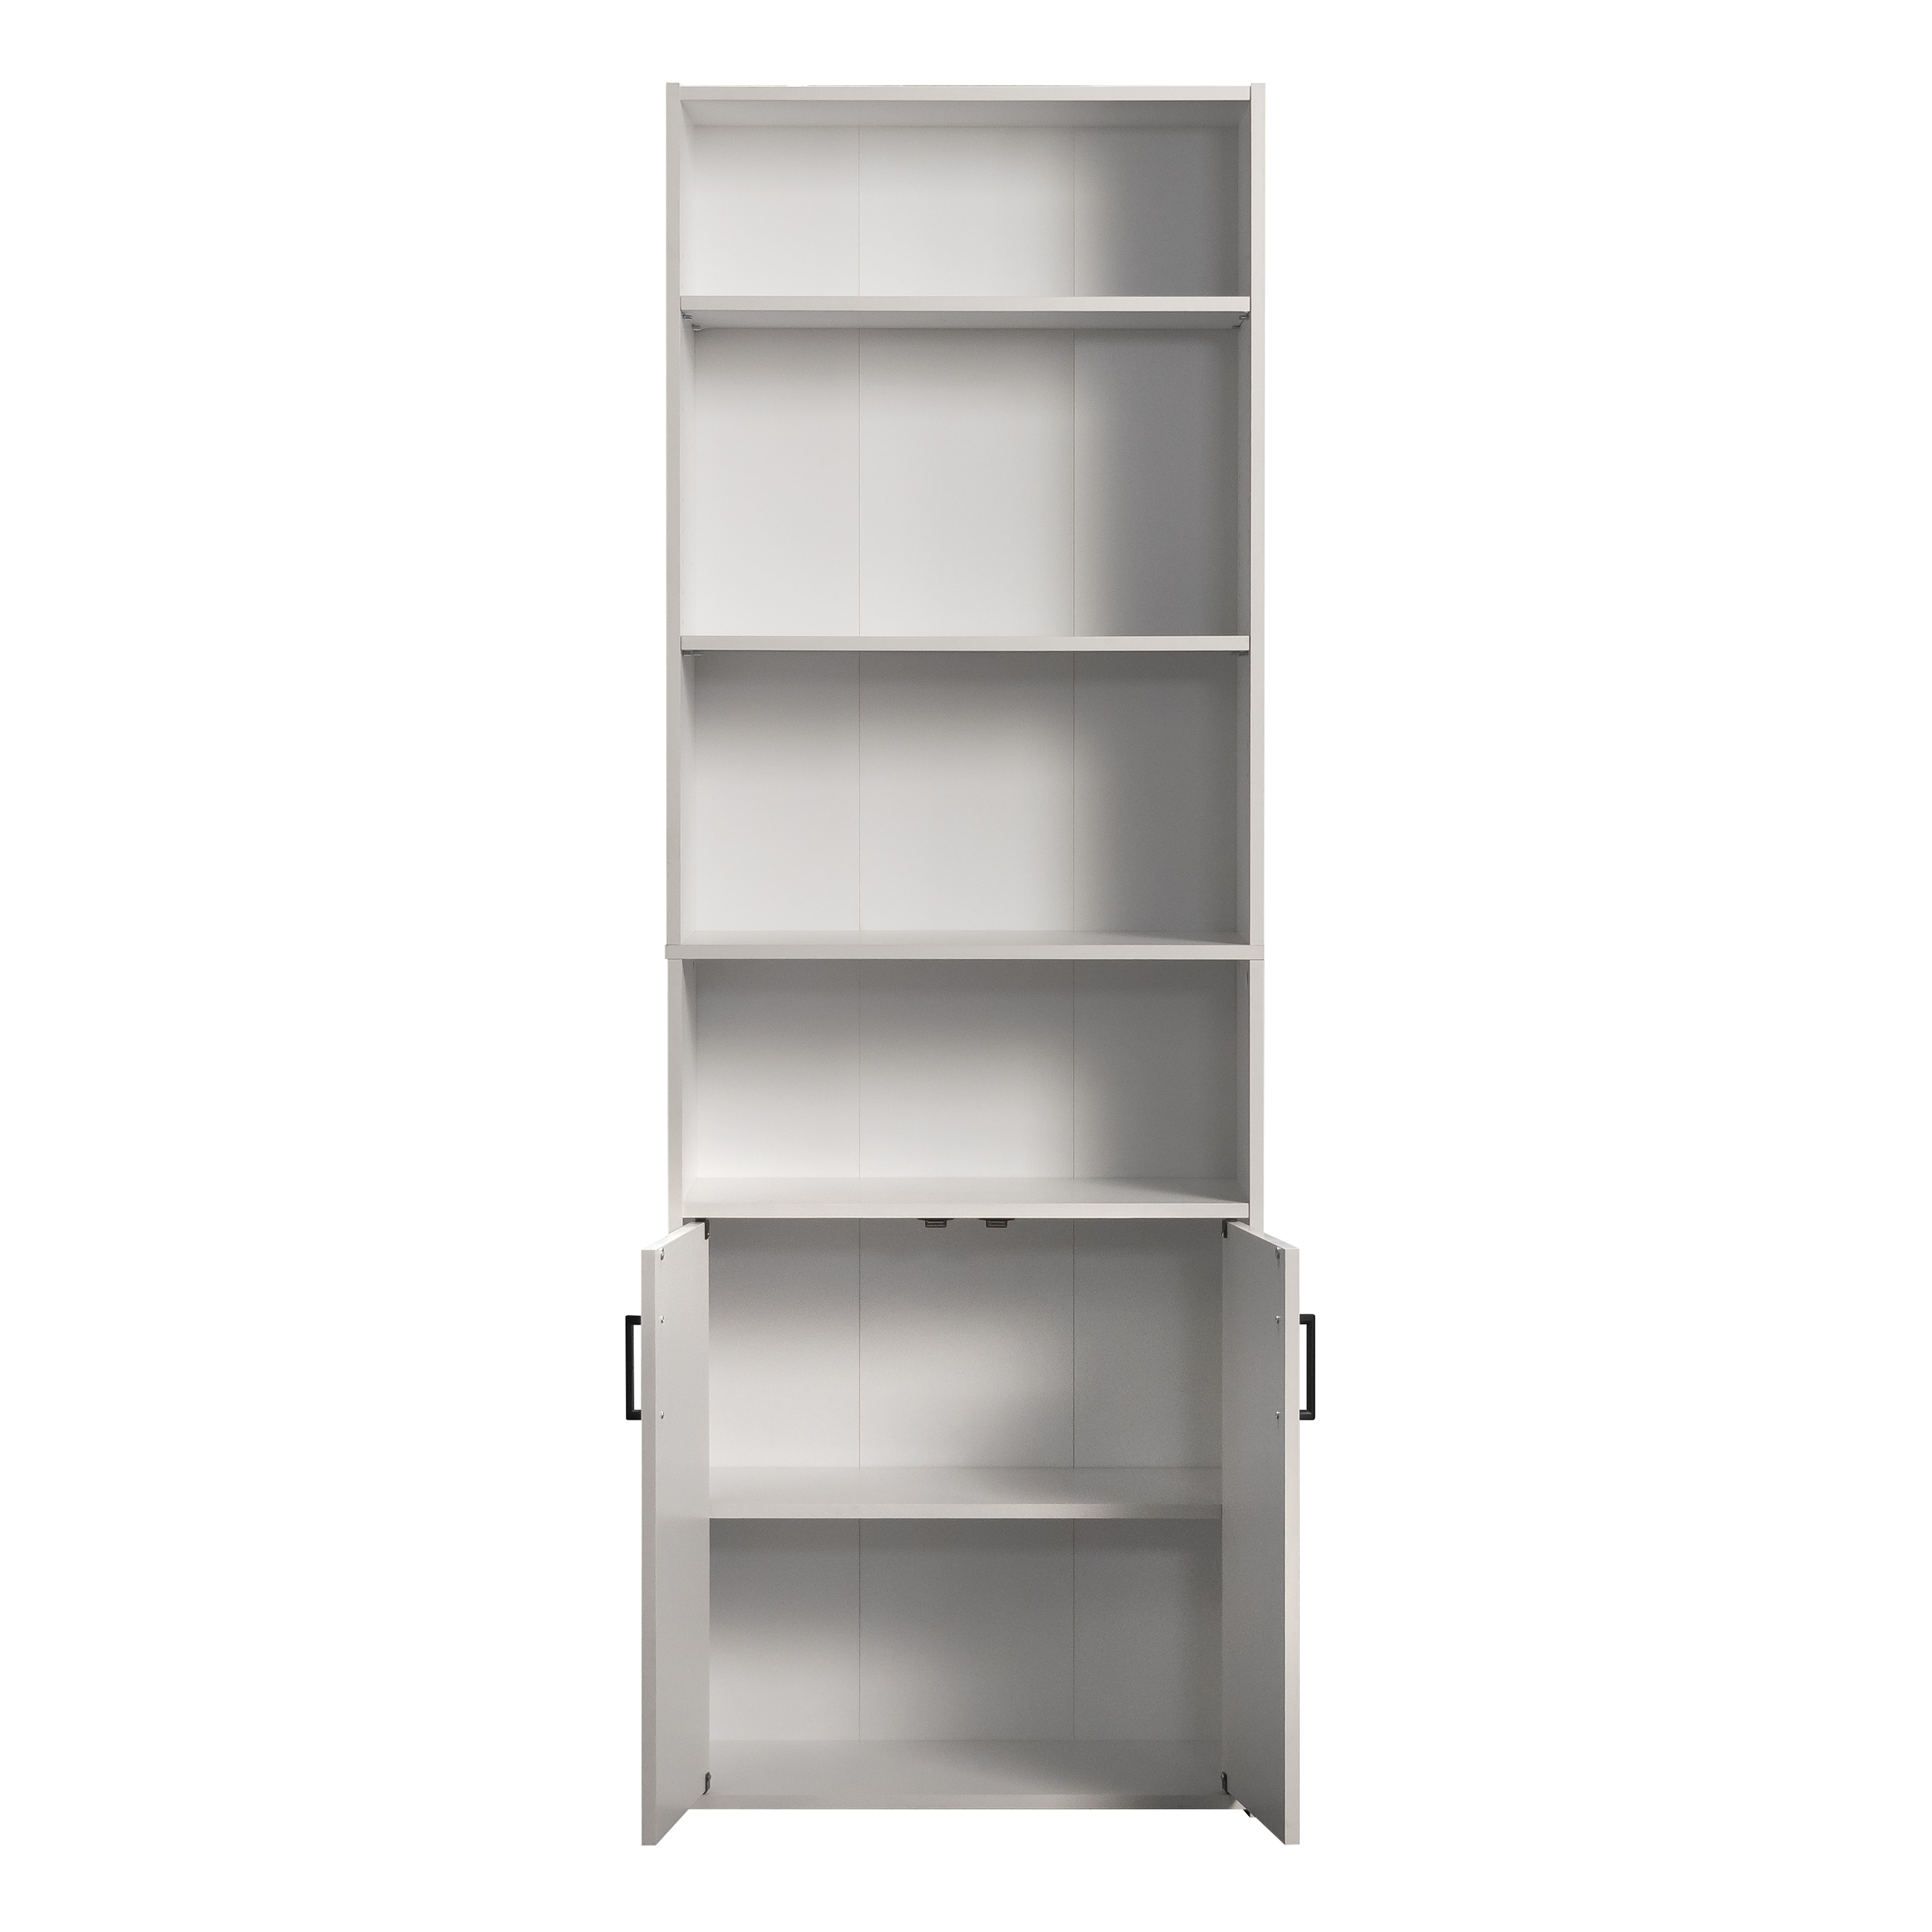 Mainstays Traditional 5 Shelf Bookcase with Doors, Soft White - image 4 of 5